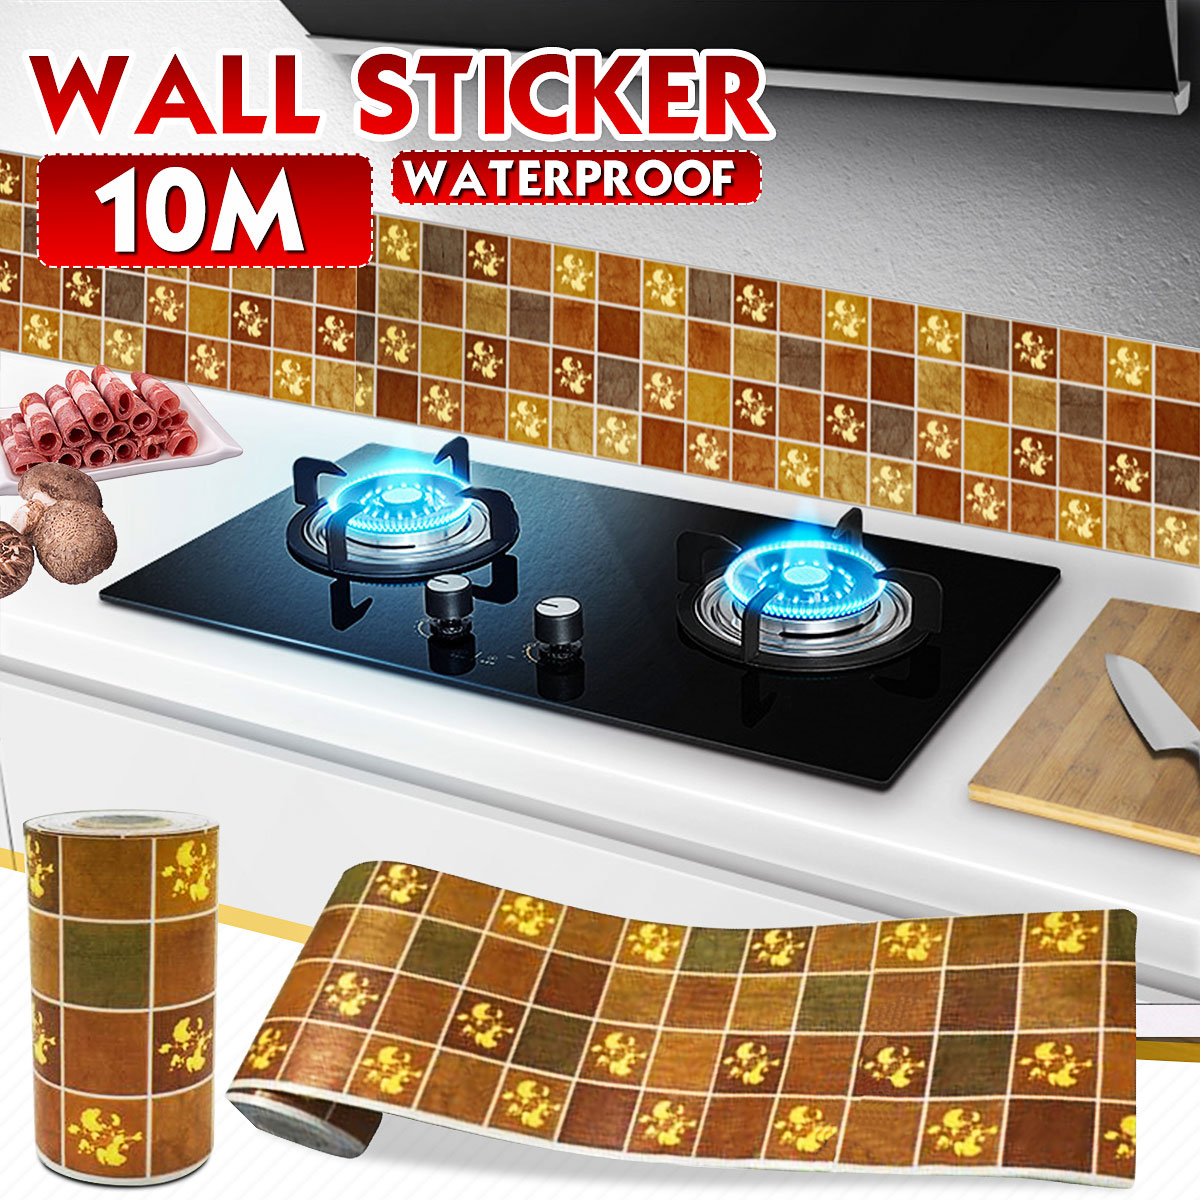 3D-Self-Adhesive-Waterproof-Wallpaper-Border-Peel-and-Stick-for-Bathroom-Kitchen-Counter-Top-Tiles-S-1725407-1